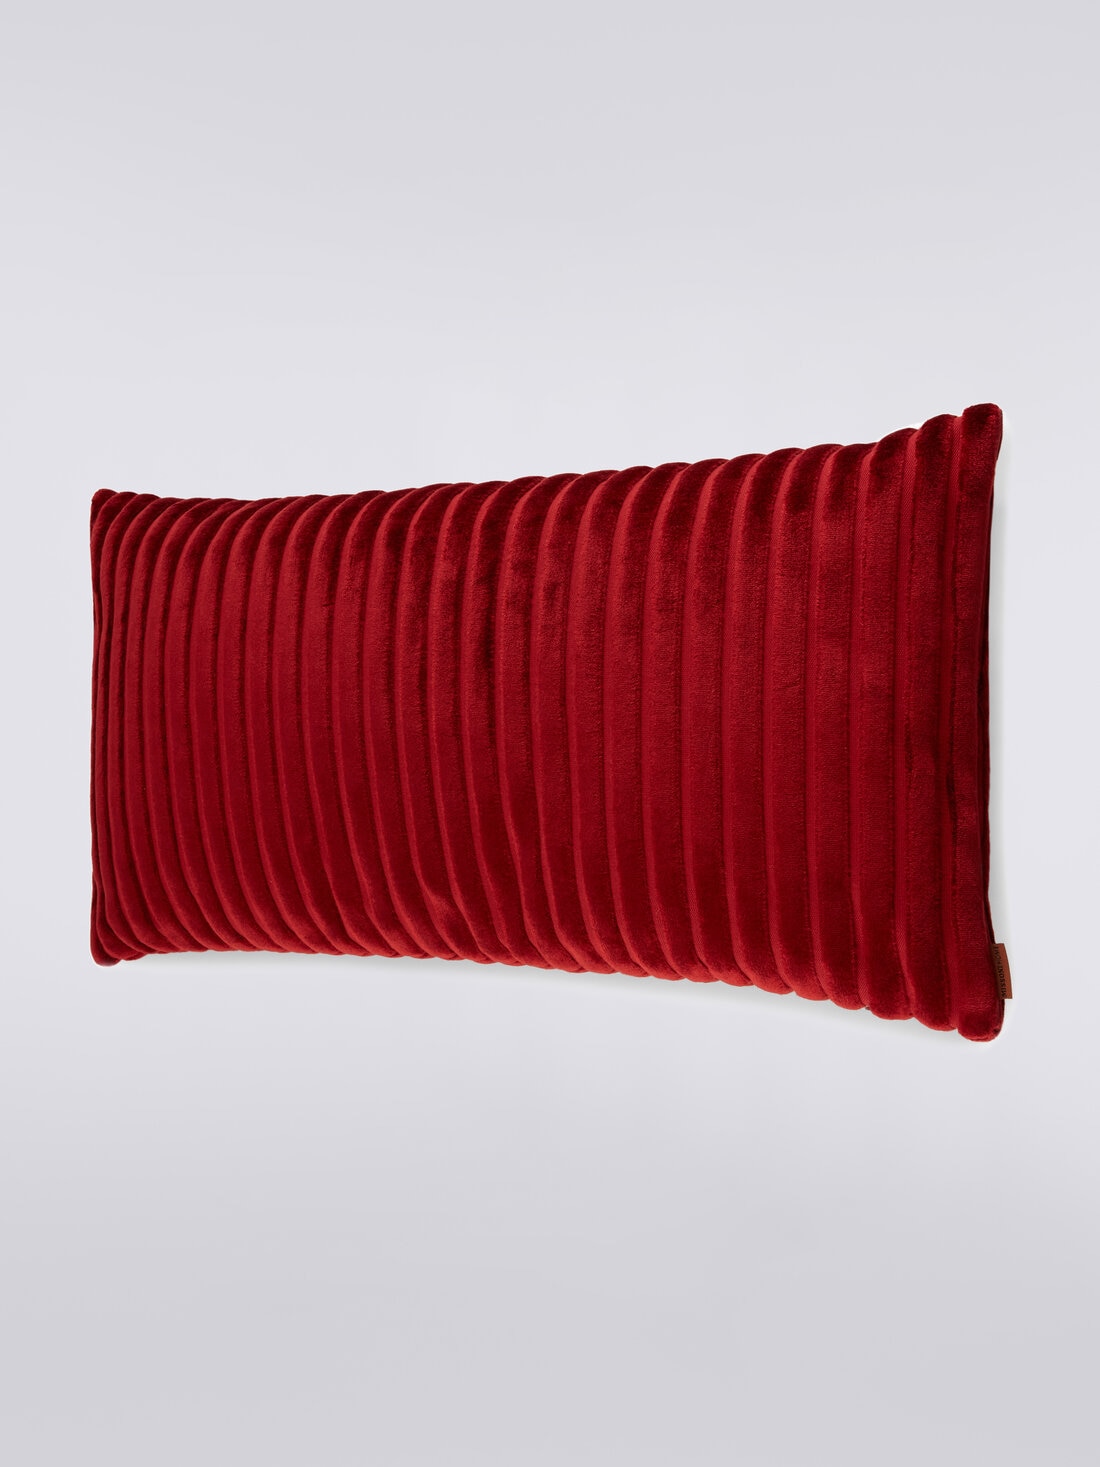 Coomba Cushion 30X60, Red  - 8033050074532 - 1